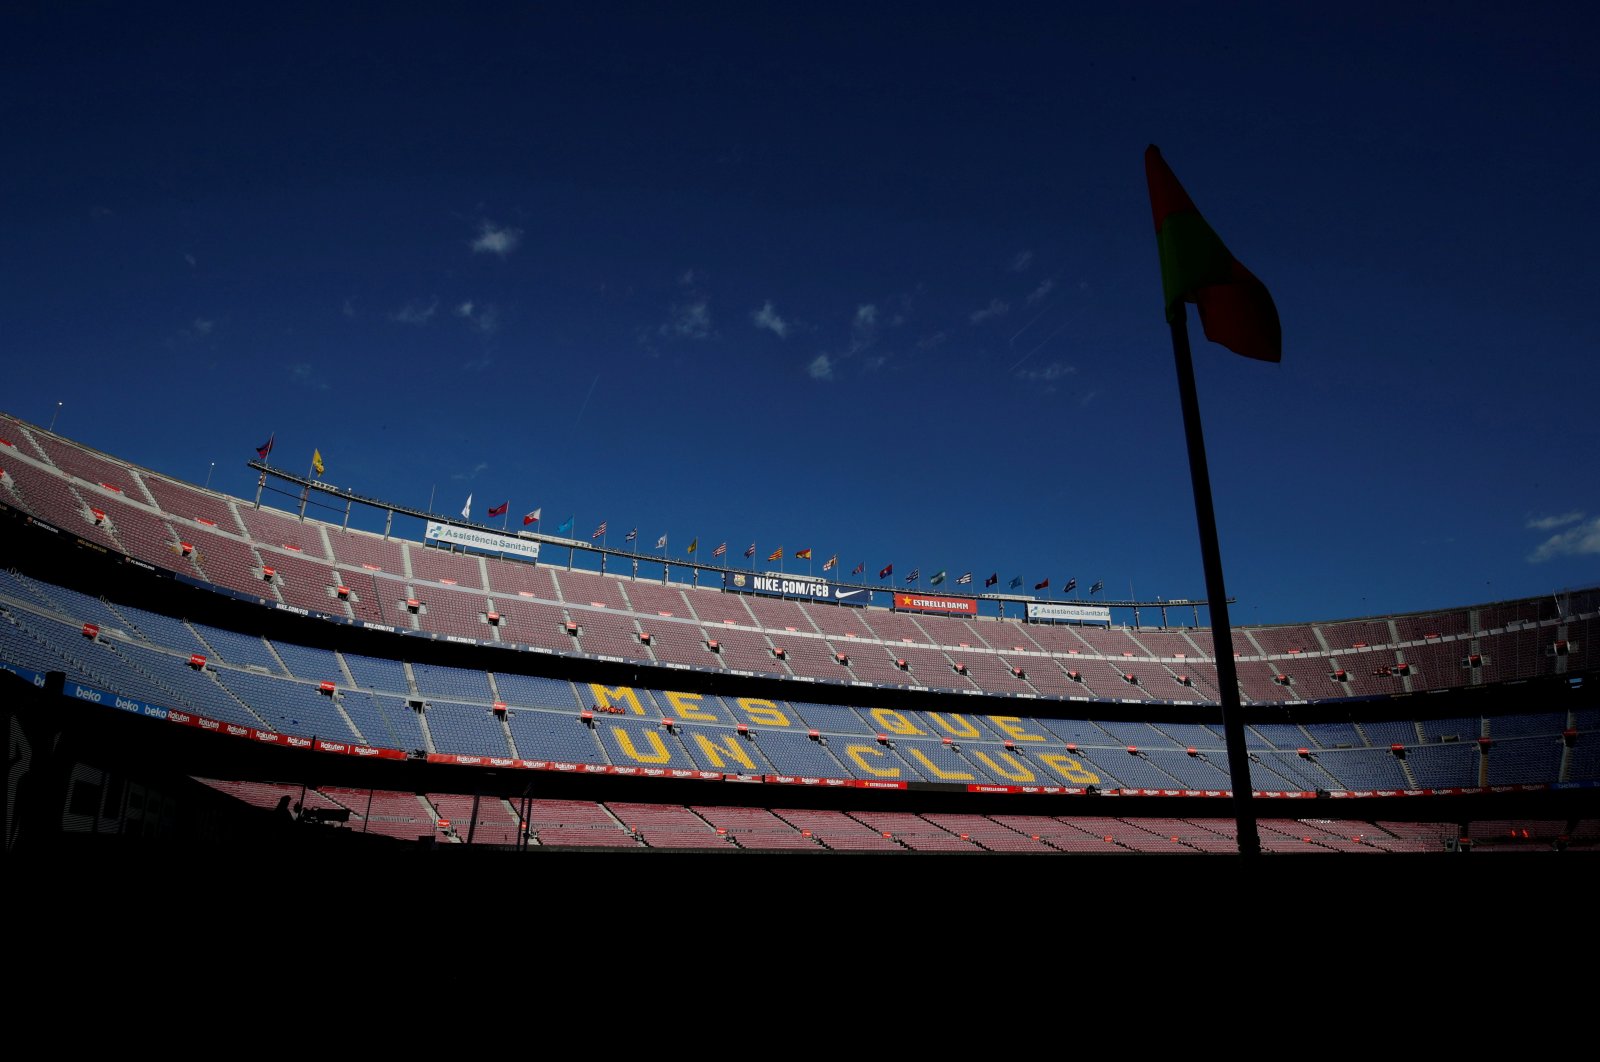 General view inside the Camp Nou stadium, Barcelona, Spain, March 7, 2020. (REUTERS Photo)